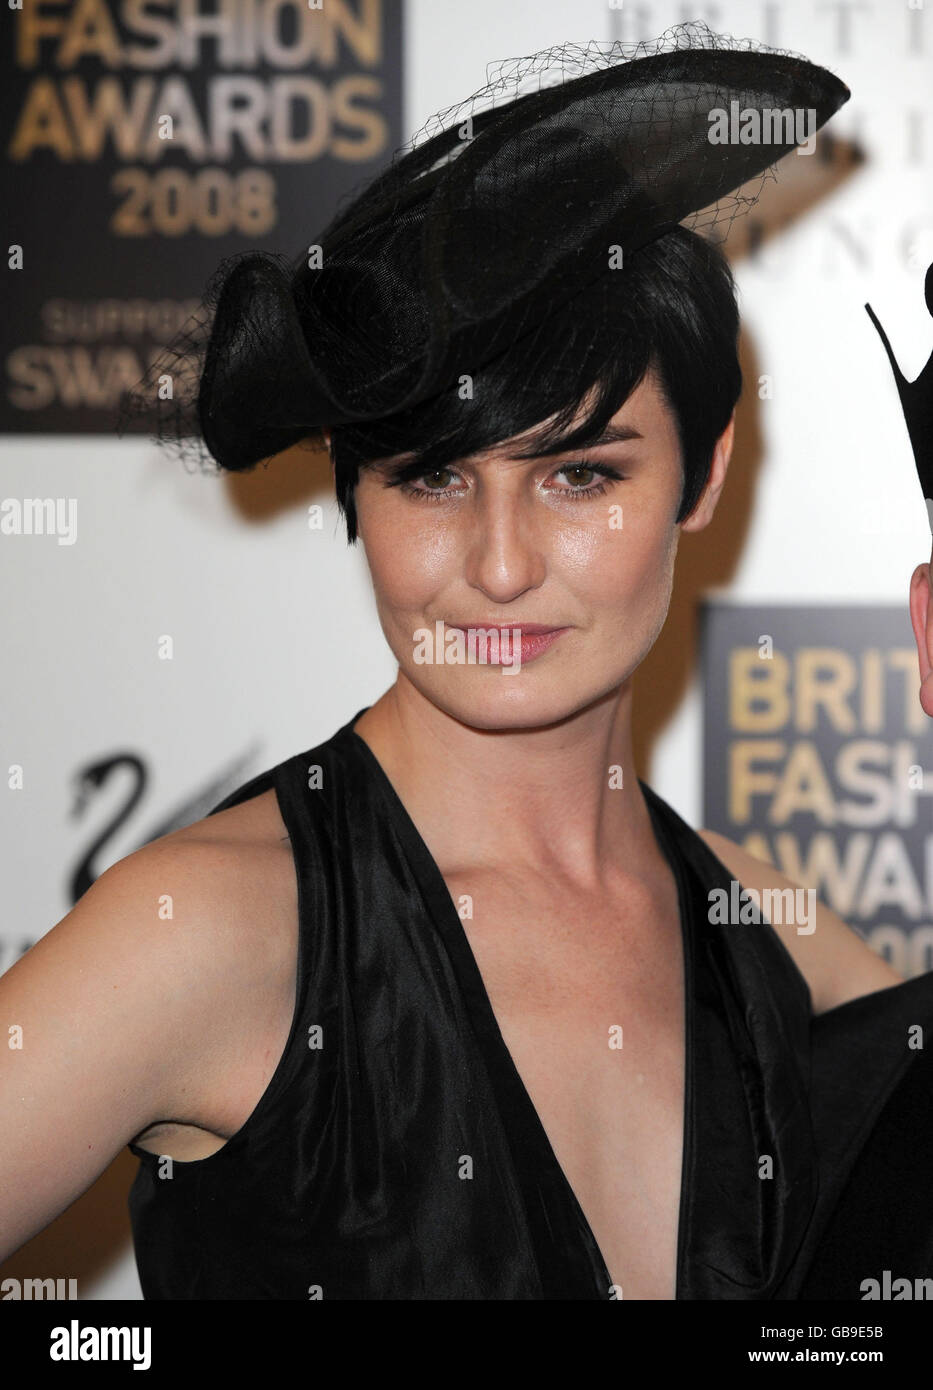 Erin O'Connor arrives for the 2008 British Fashion Awards at the Royal Horticultural Hall, 80 Vincent Square, London. Stock Photo